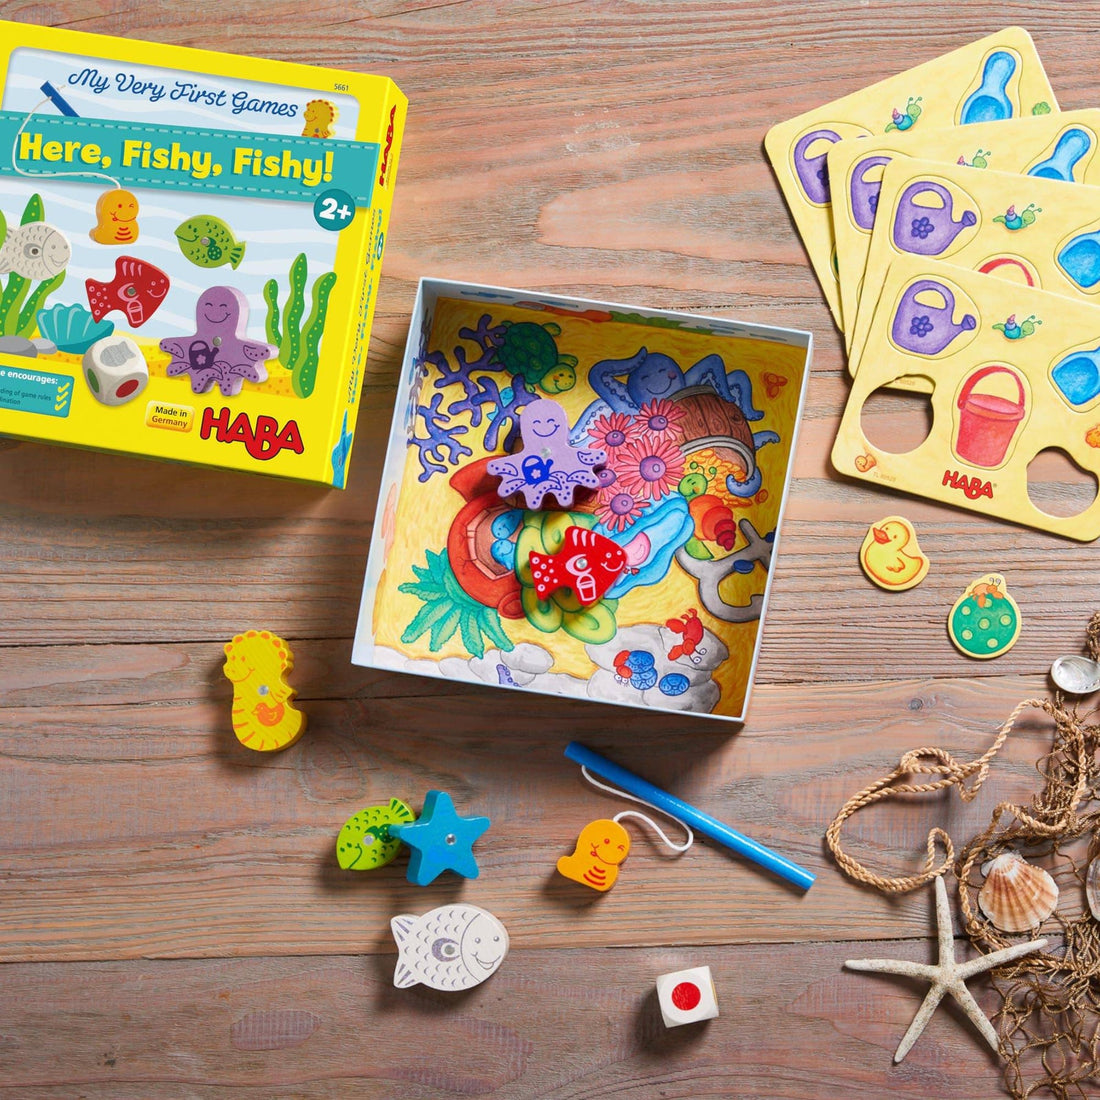 My Very First Games - Here, Fishy, Fishy! Magnetic Game